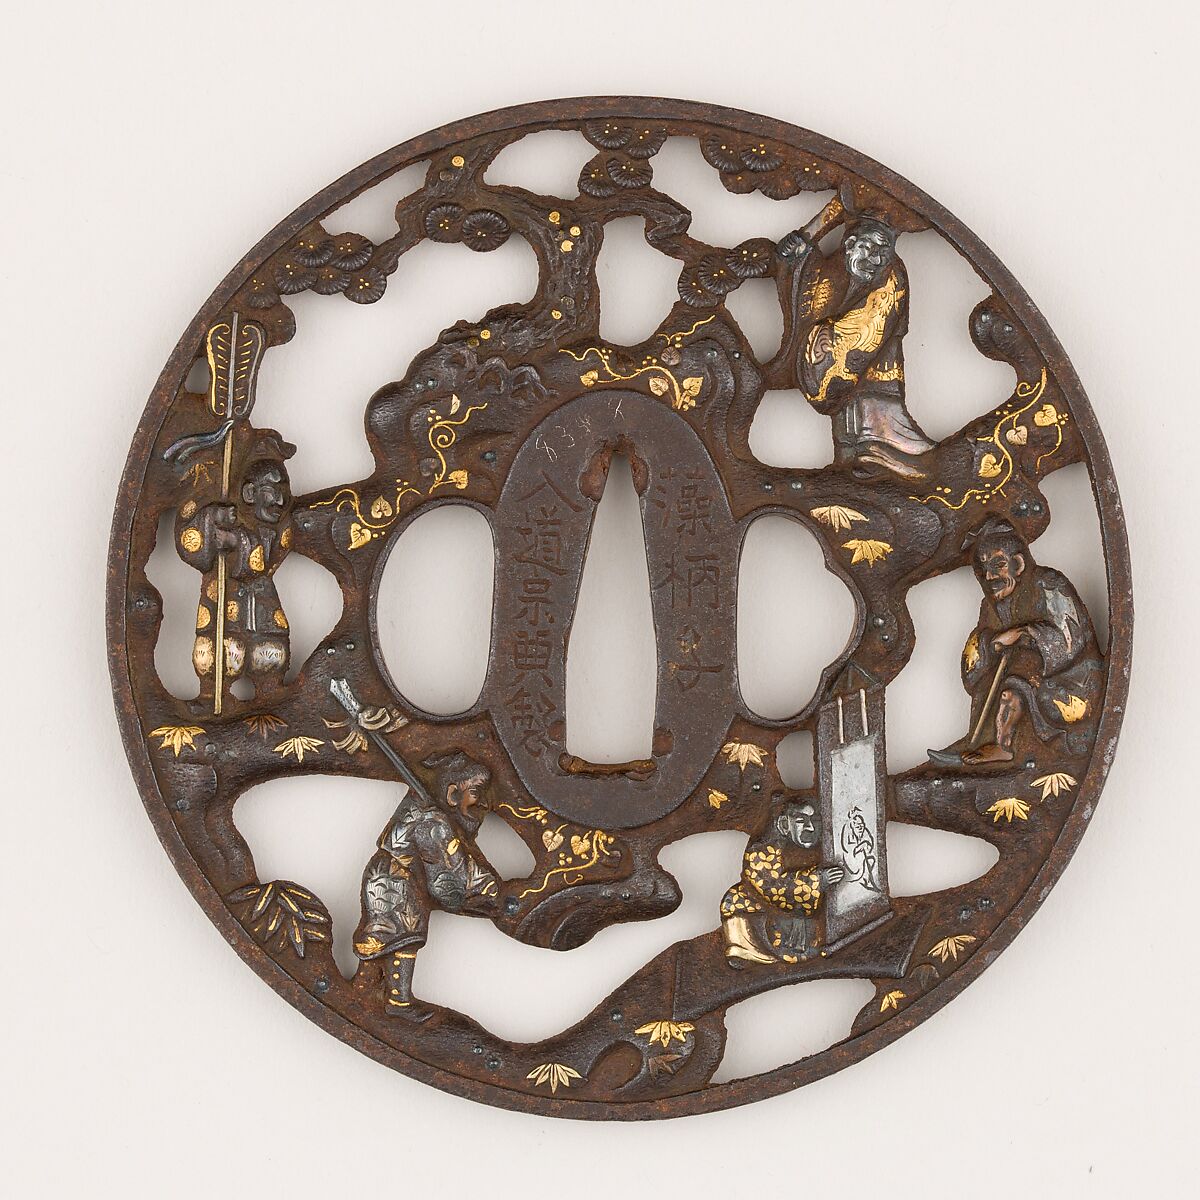 Sword Guard (<i>Tsuba</i>) With (probably) the Motif of The Seven Sages in the Bamboo Groove (竹林七賢か透鐔), Iron, gold, copper, copper-gold alloy (shakudō), Japanese 